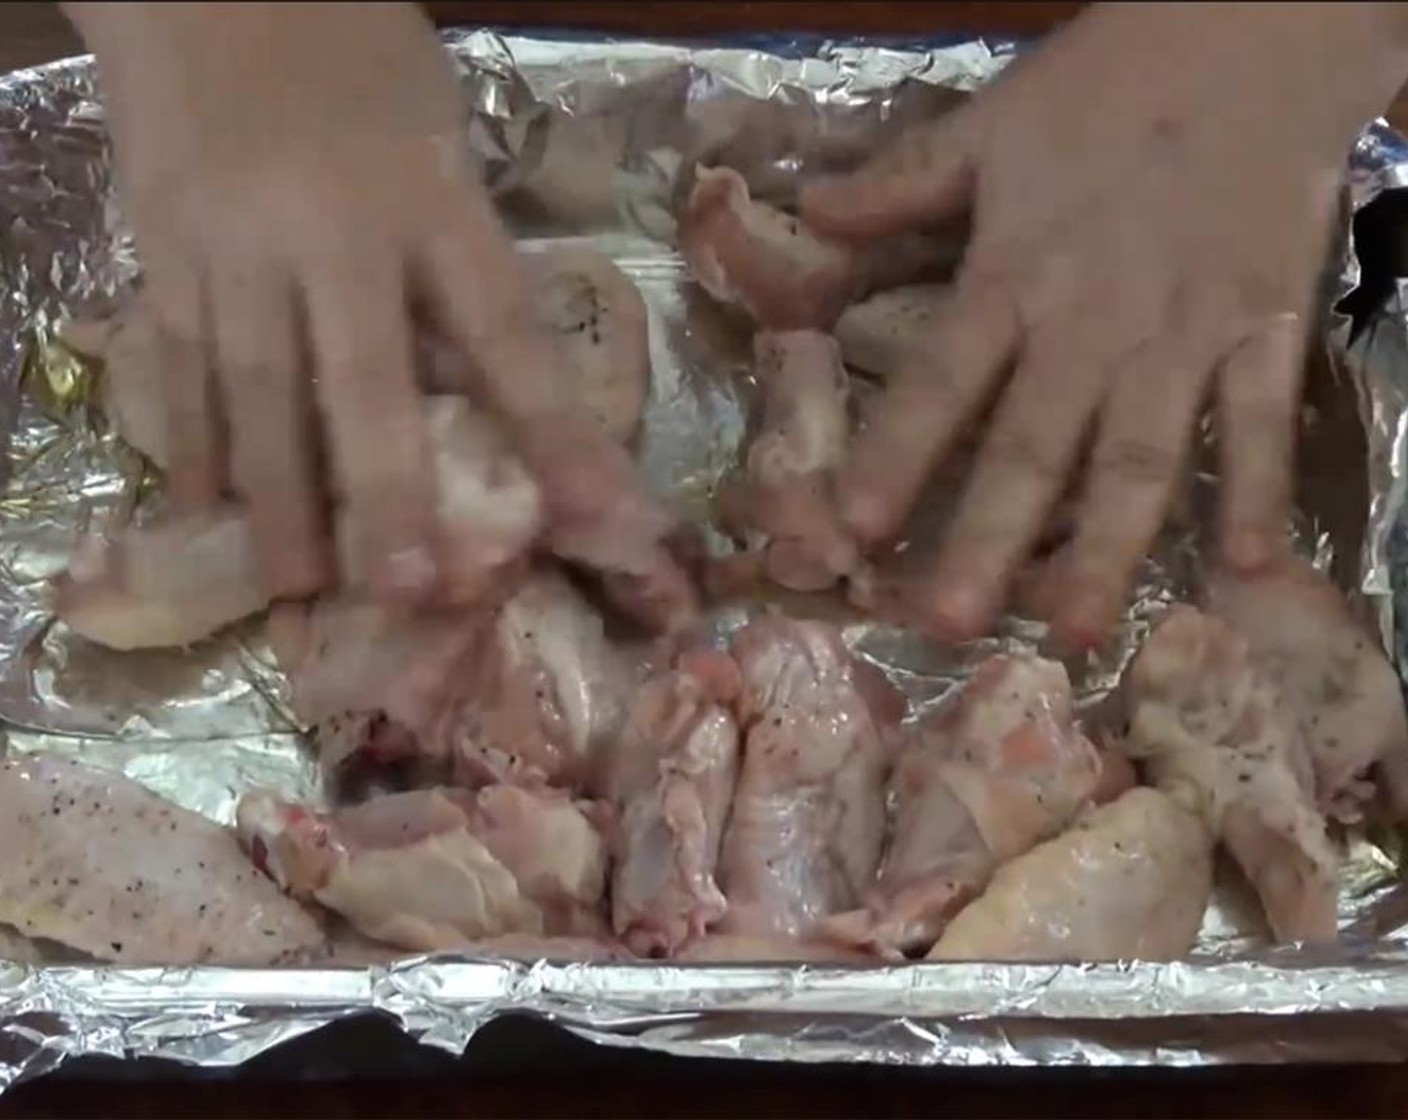 step 4 With clean hands, roll the wings around so that they are all completely coated. Place the roasting pan in the oven for 30 minutes.